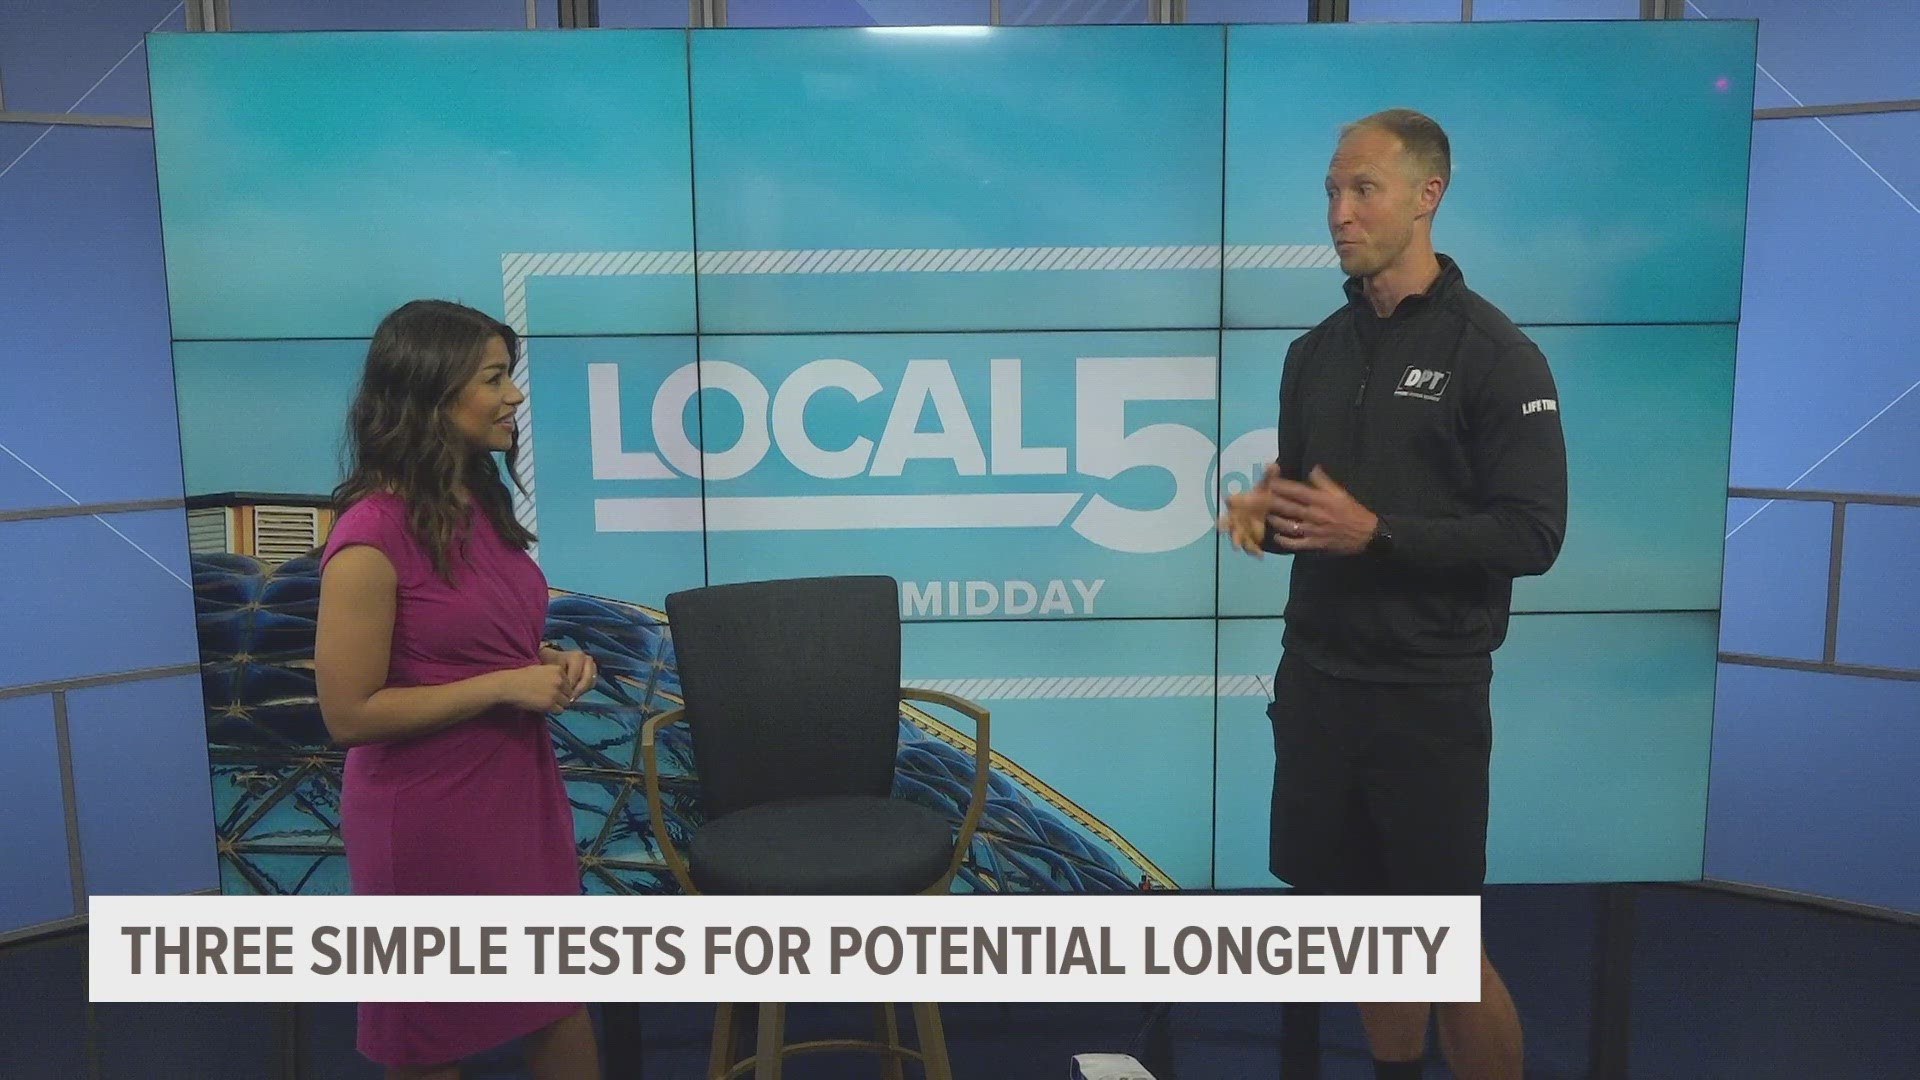 Caleb Herman, a personal training leader at Lifetime Des Moines, shares three easy exercises to improve your potential longevity.